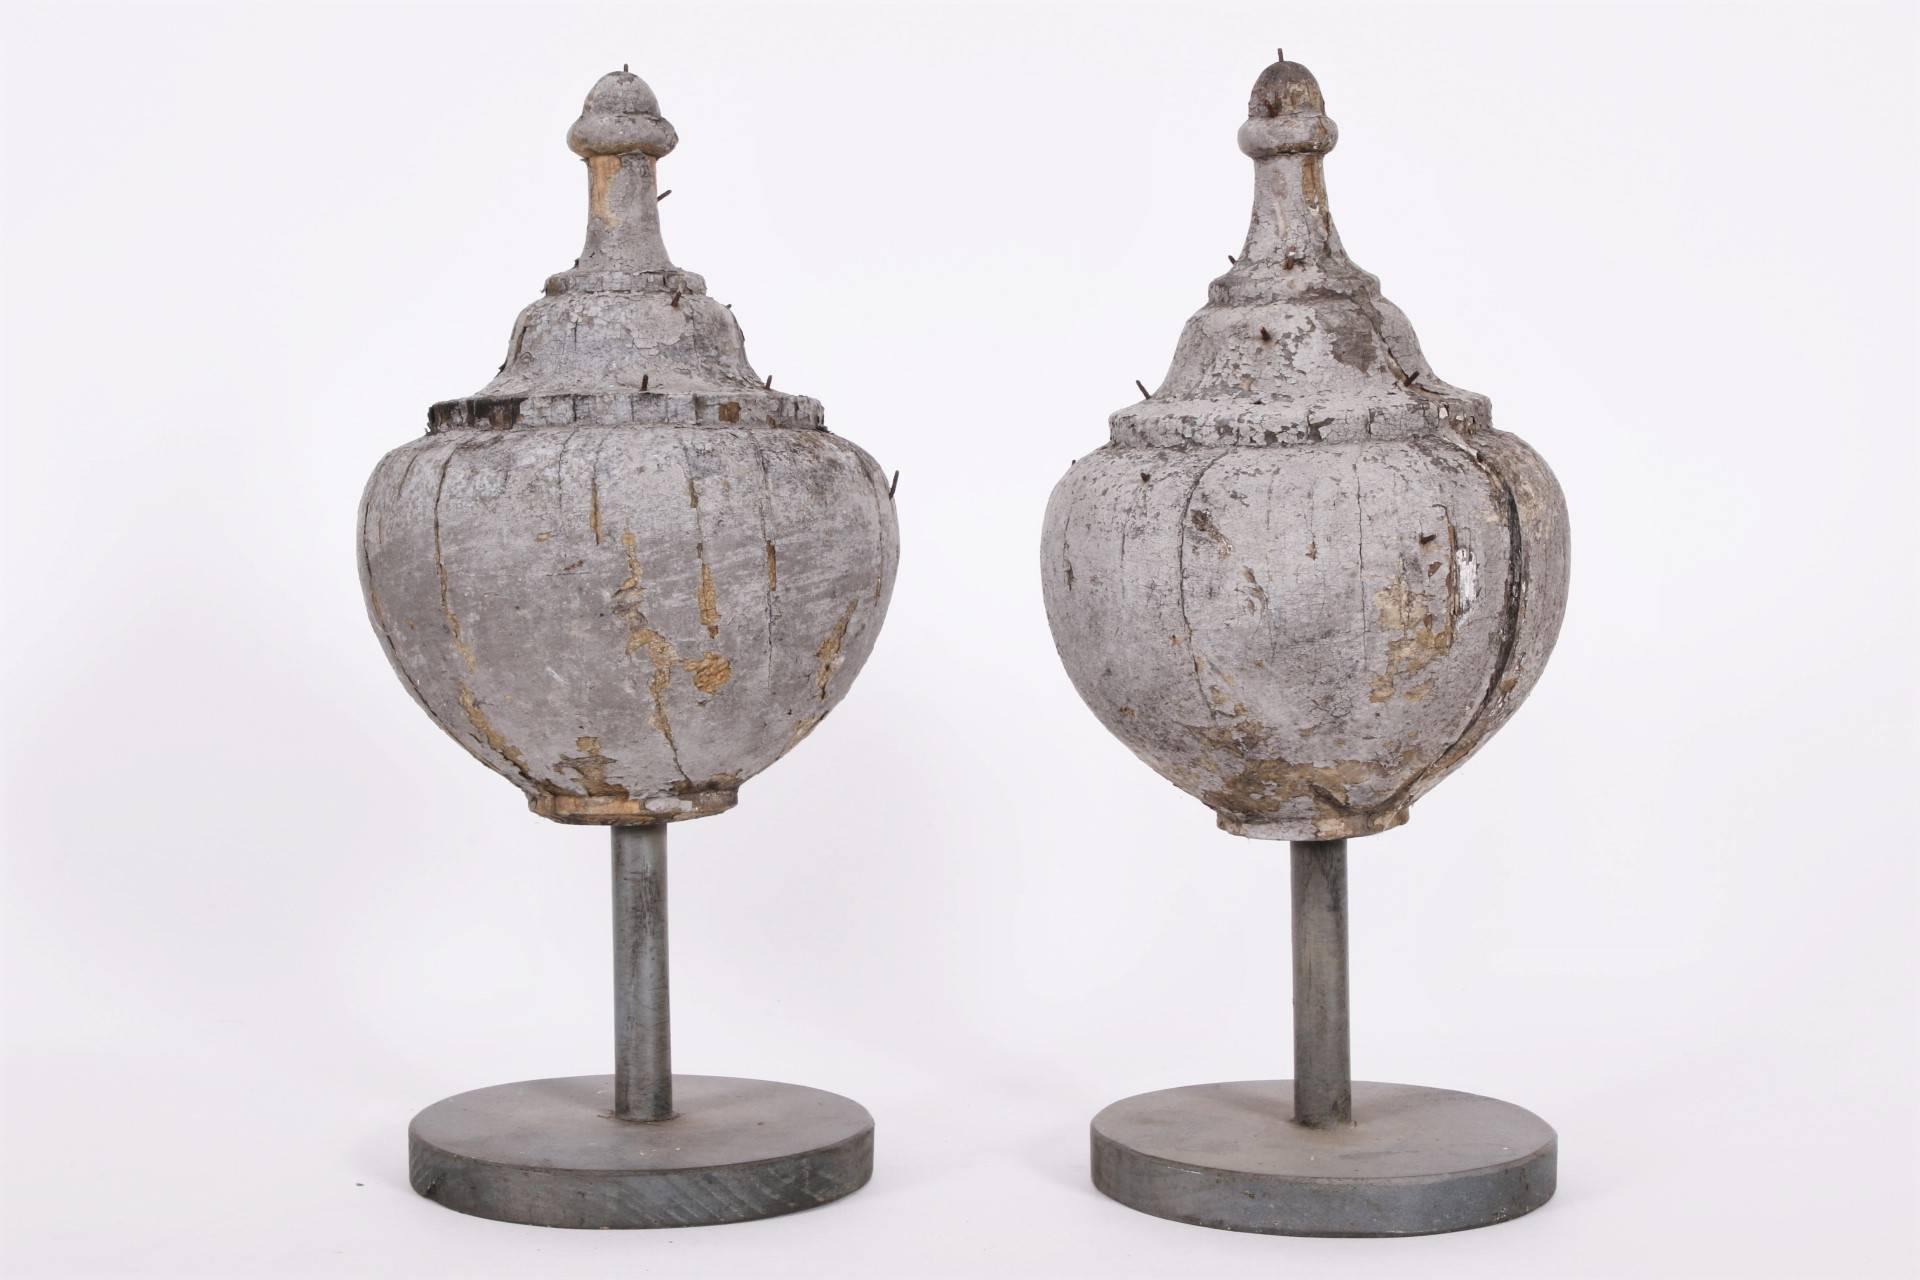 In a weathered grey paint. Mounted on stands.
Condition: cracks through the centres, overall weathered paint.